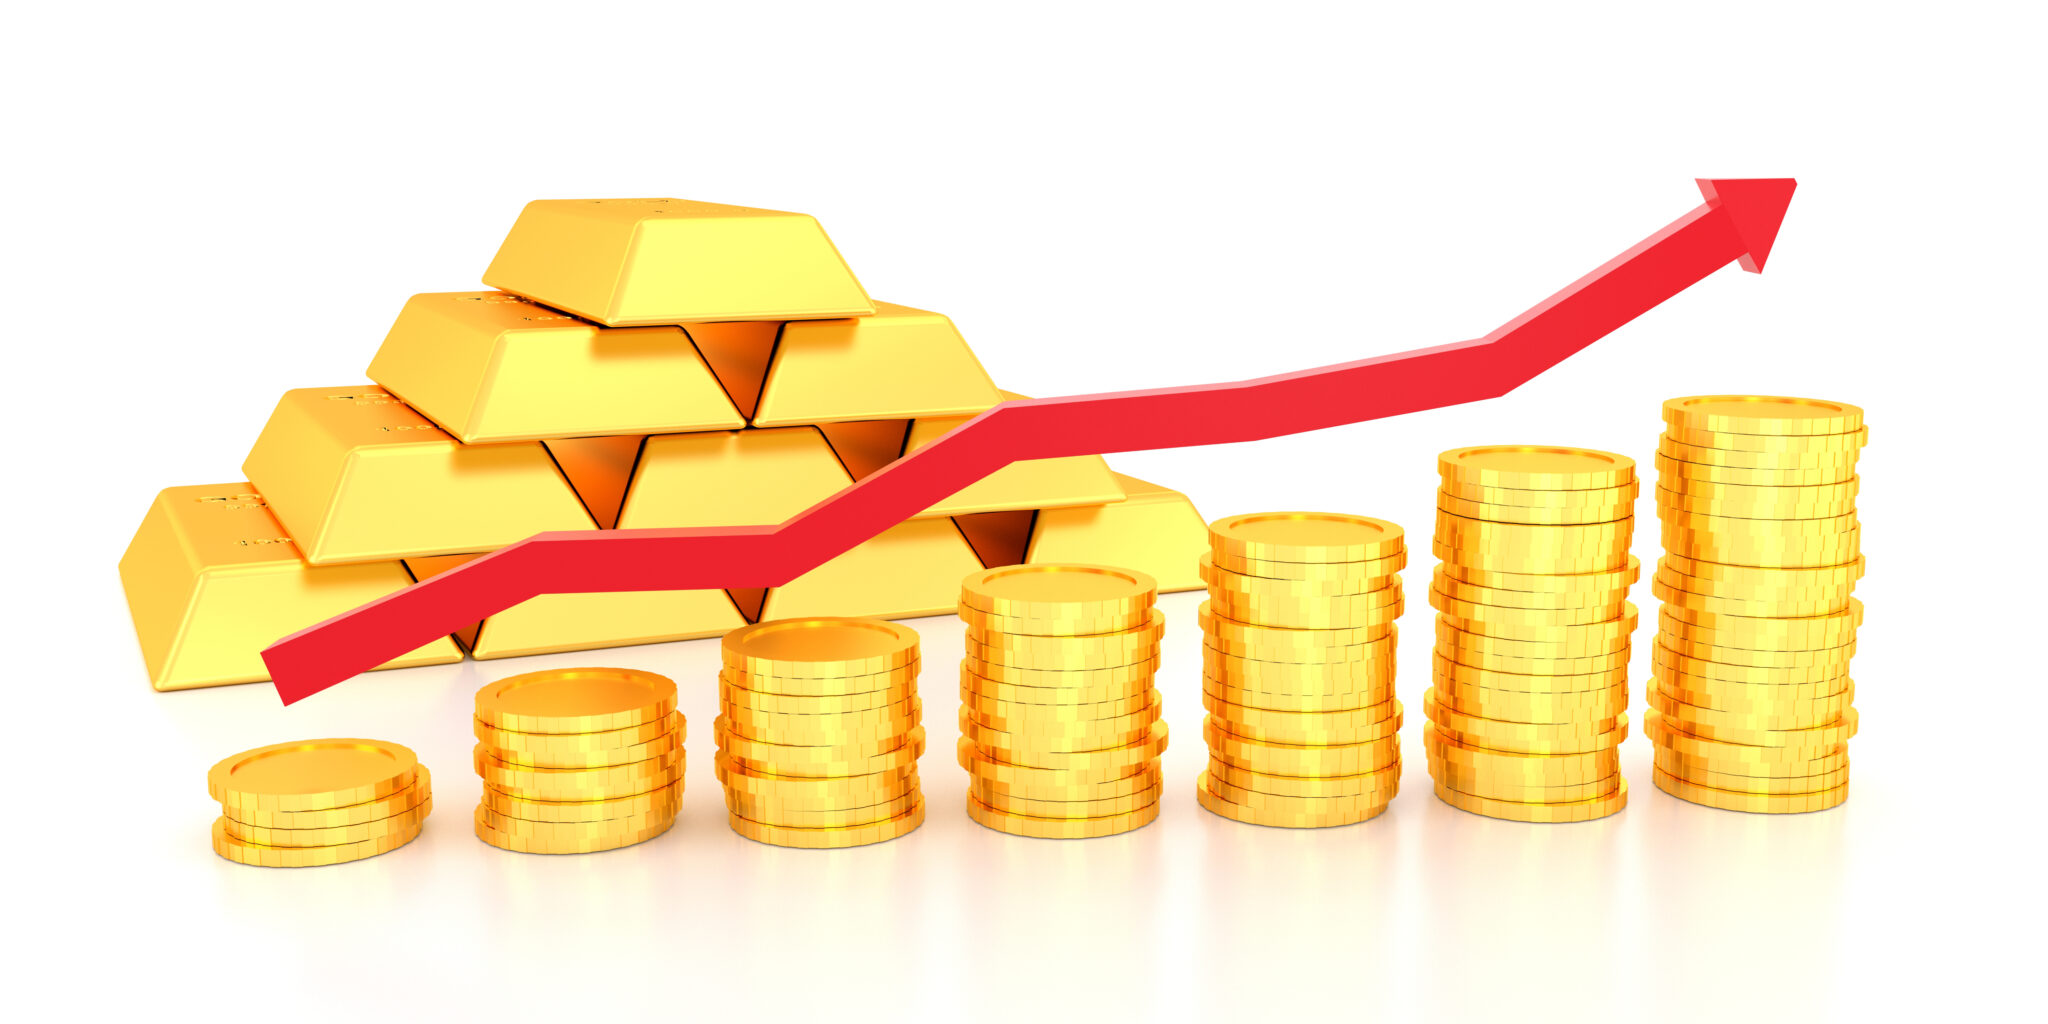 Spot price of gold is at the epicenter of the economy